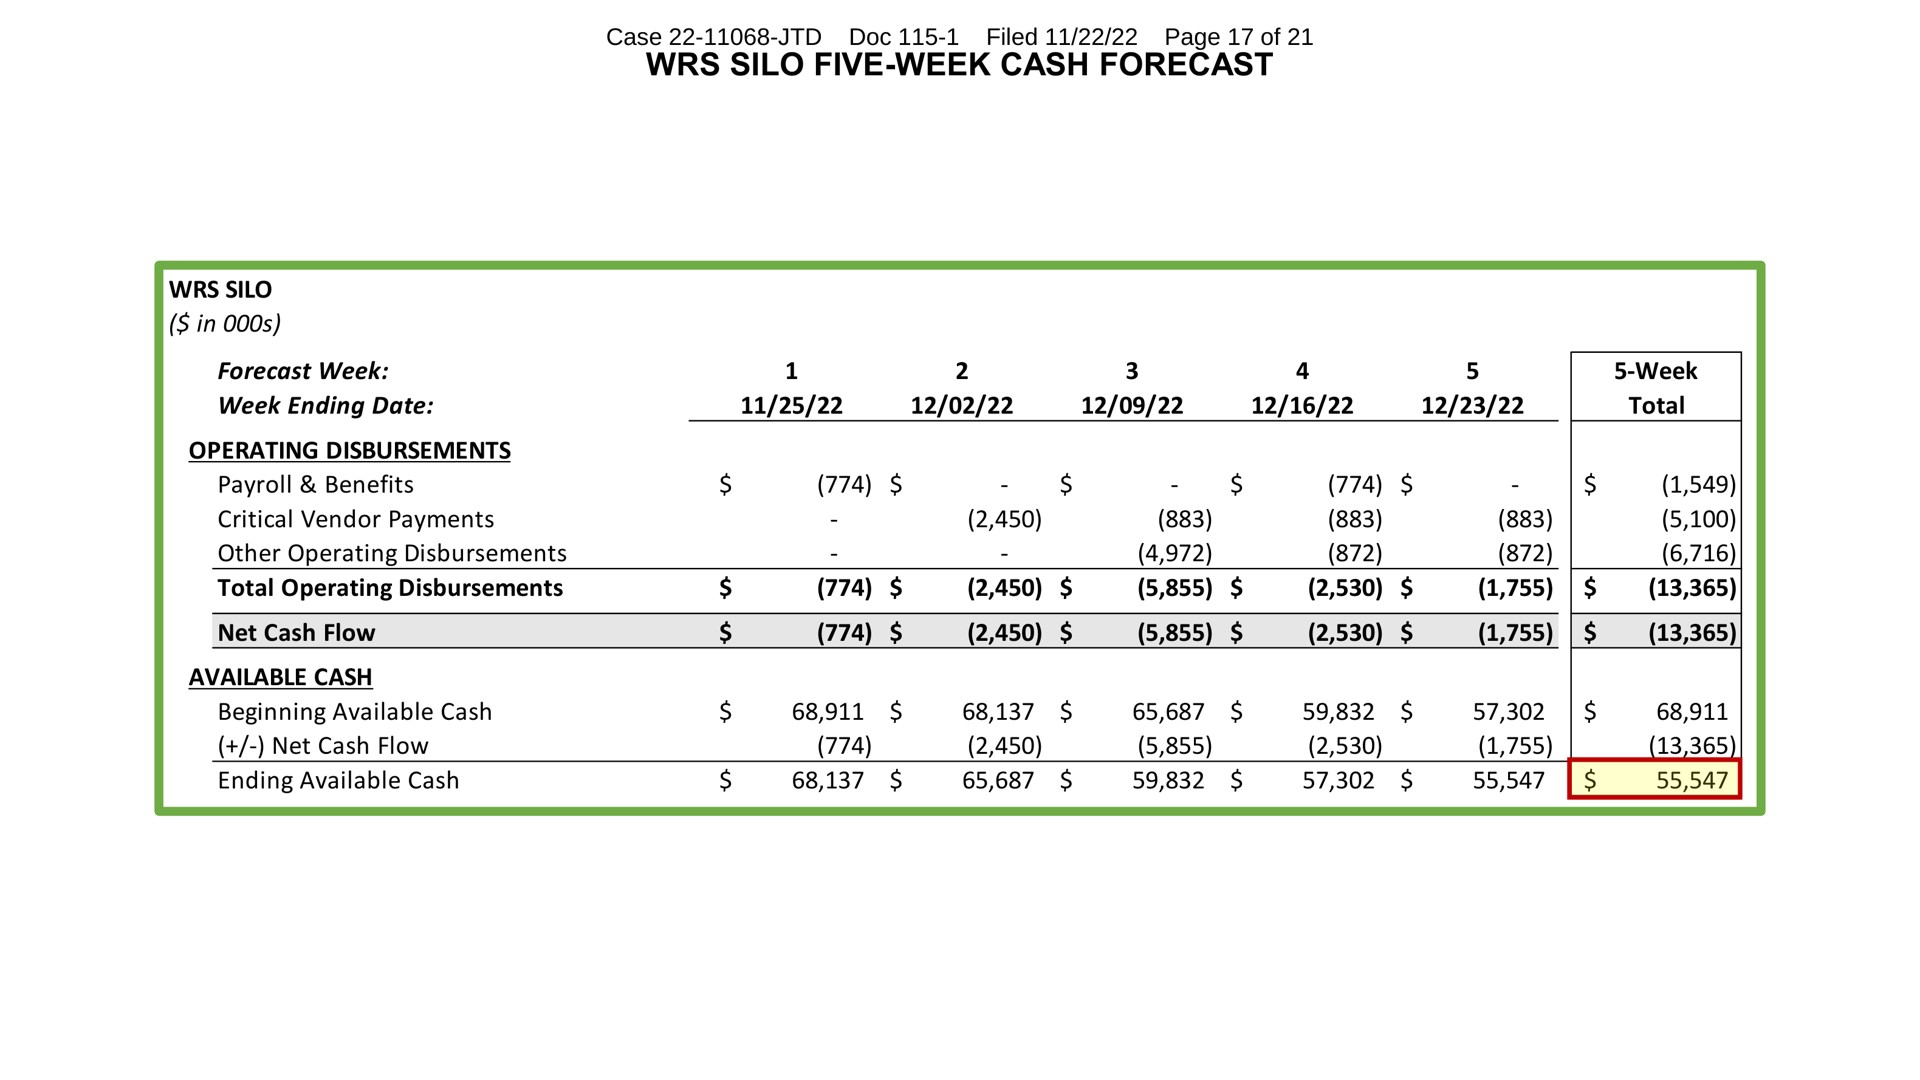 silo five week cash forecast week total silo in forecast week week ending date operating disbursements payroll benefits critical vendor payments other operating disbursements total operating disbursements net cash flow available cash beginning available cash net cash flow ending available cash case doc filed page of | FTX Trading